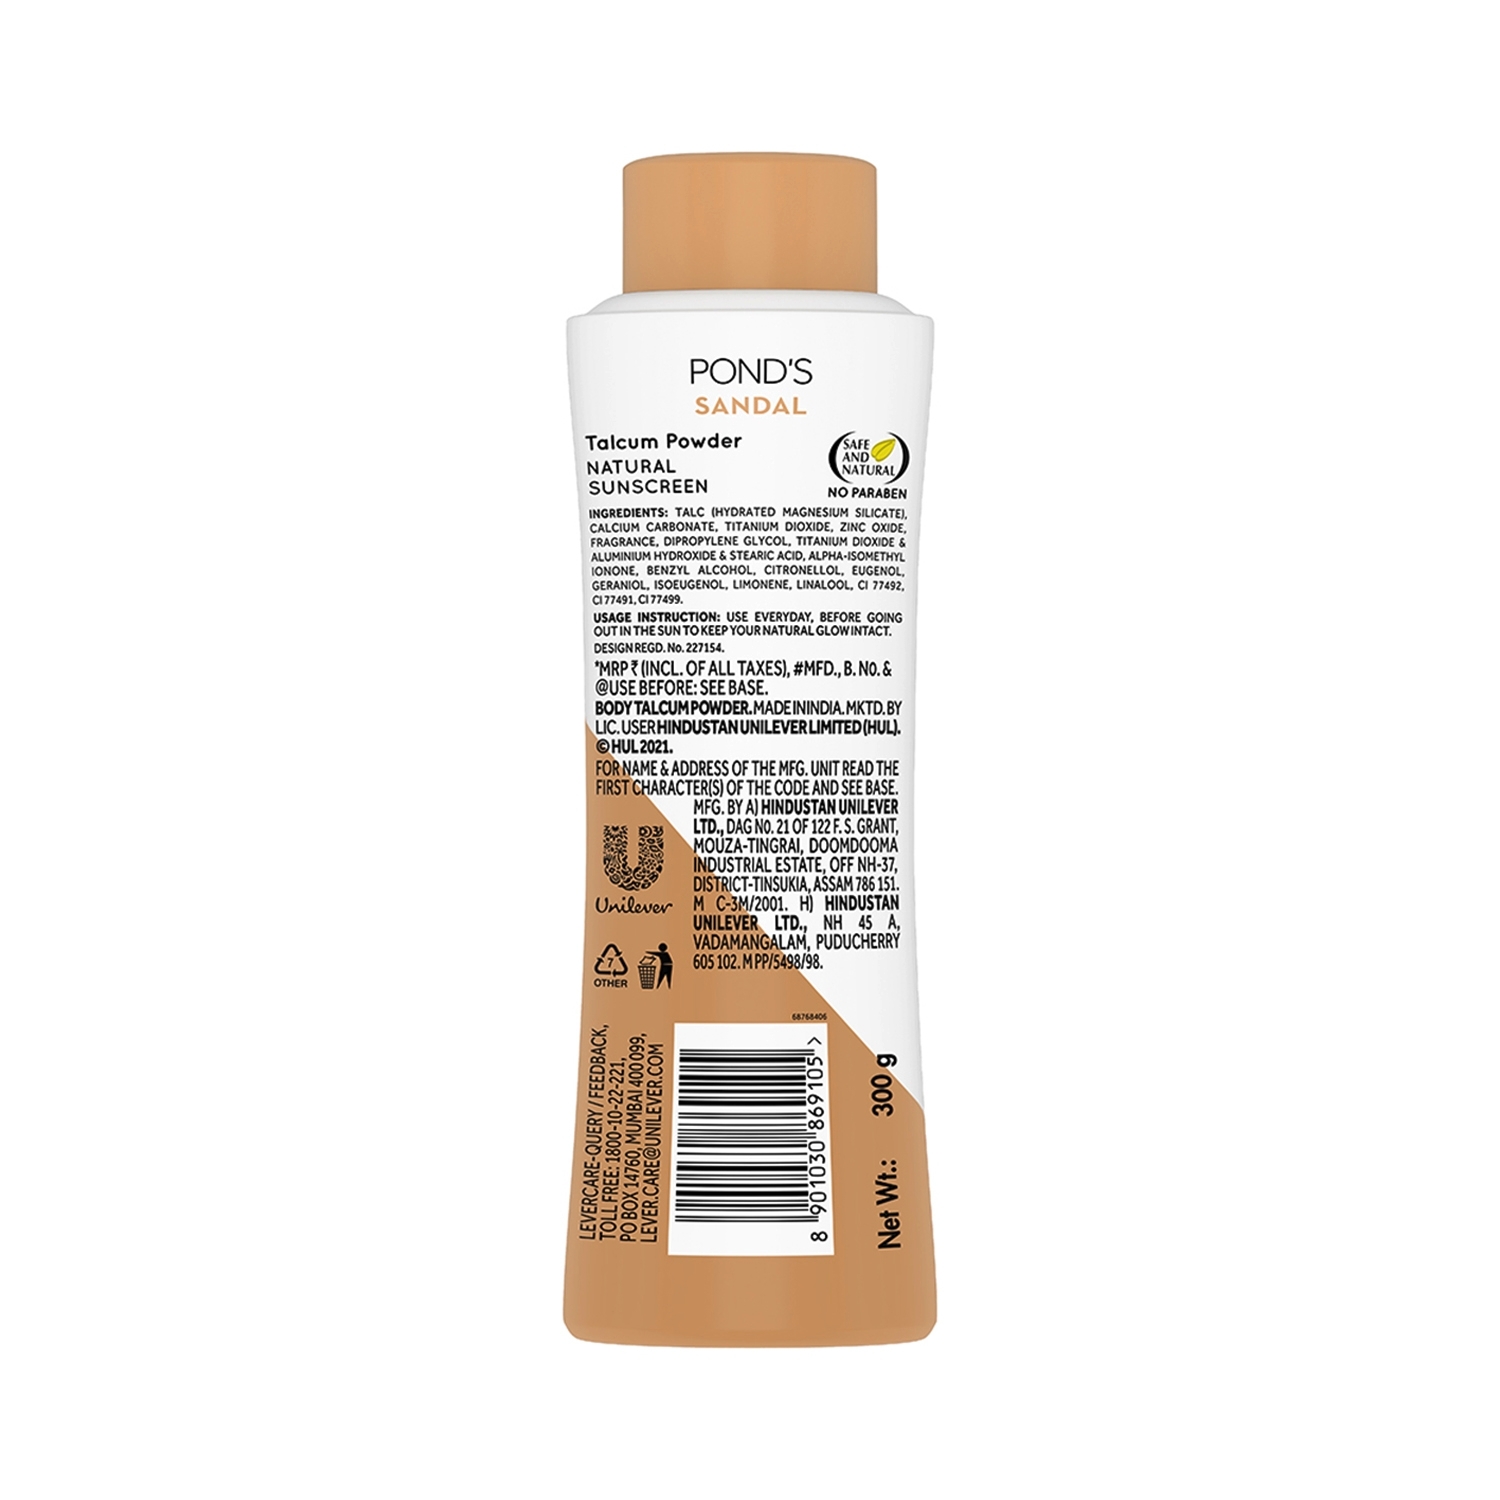 Ponds Sandal Radiance Talc 100gram pack of 4 : Amazon.in: Beauty